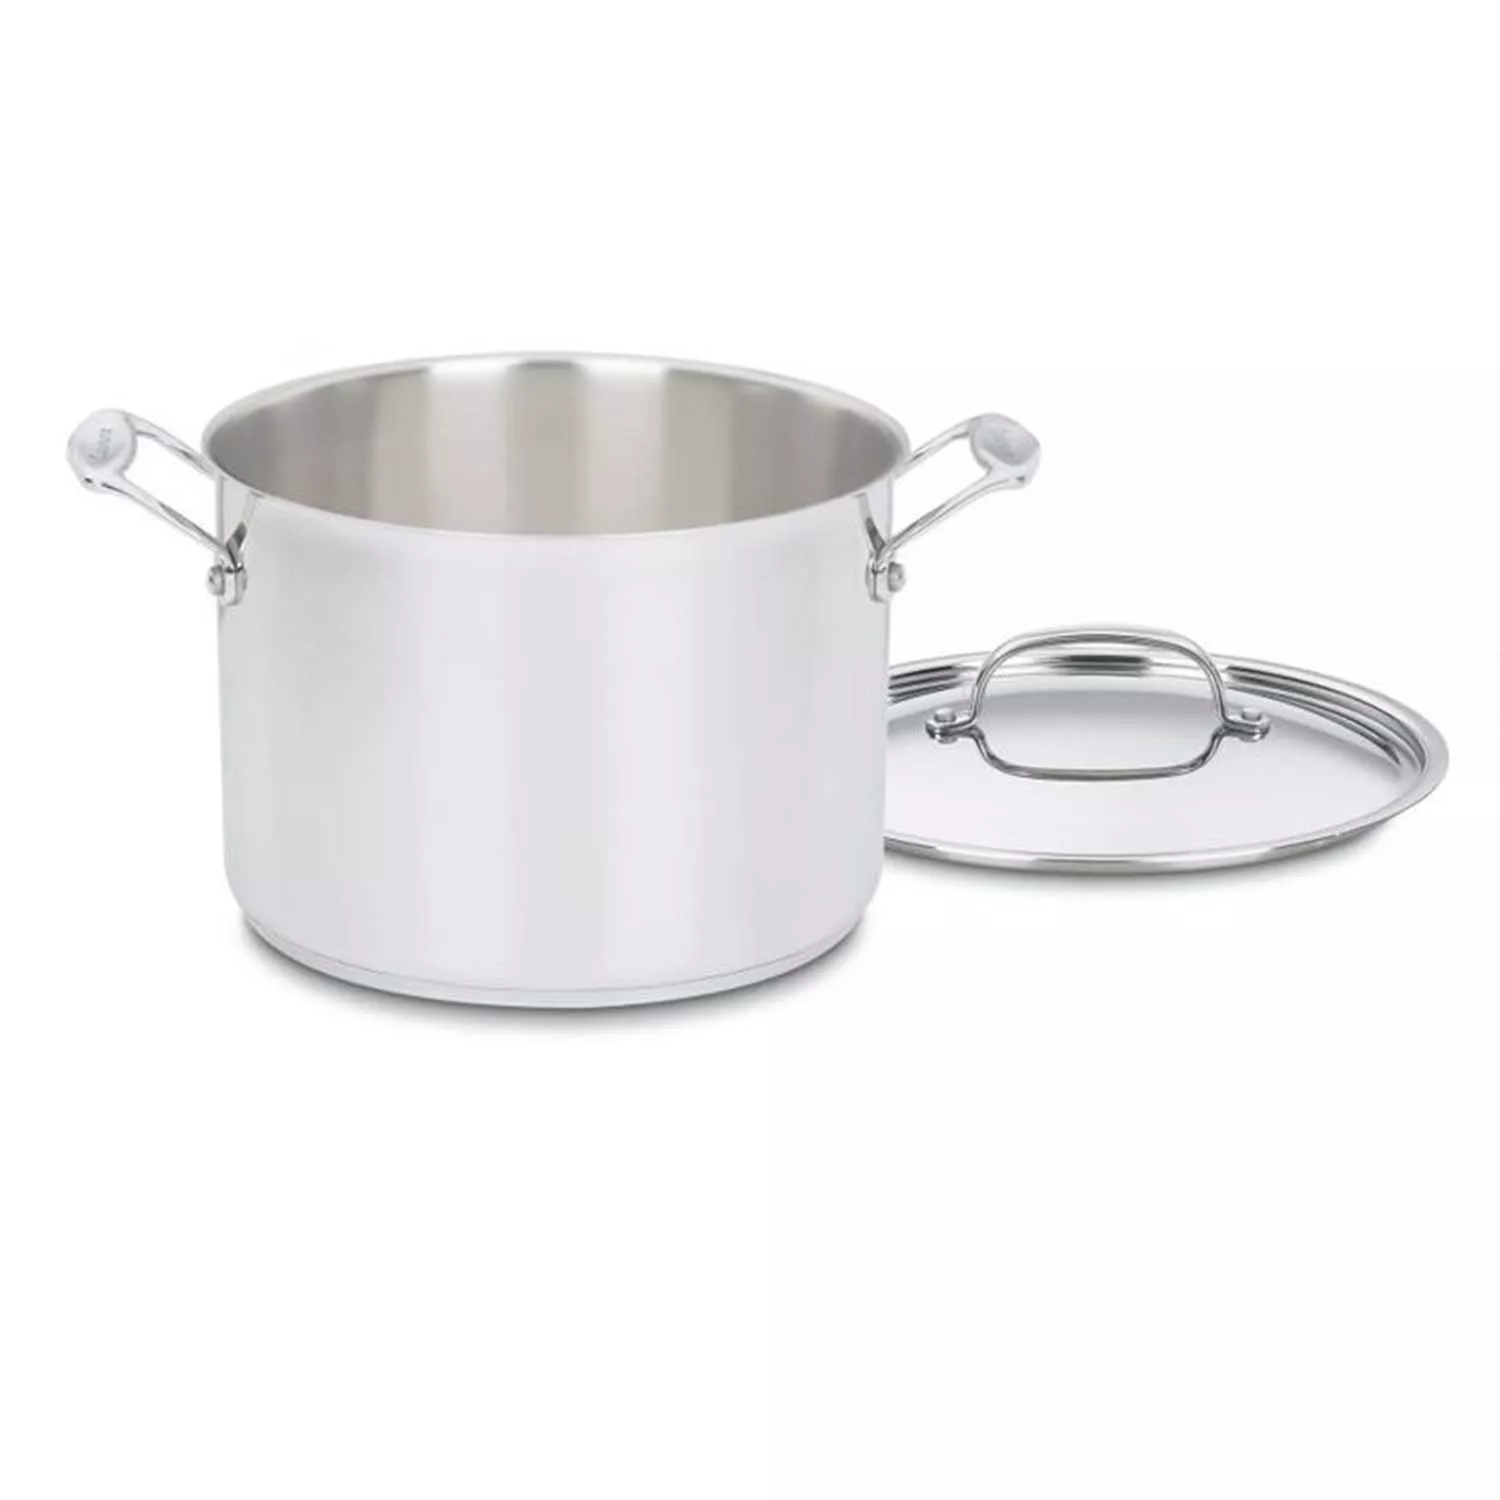 Cuisinart MultiClad Pro Stainless 8-Quart Stockpot with Cover — Luxio